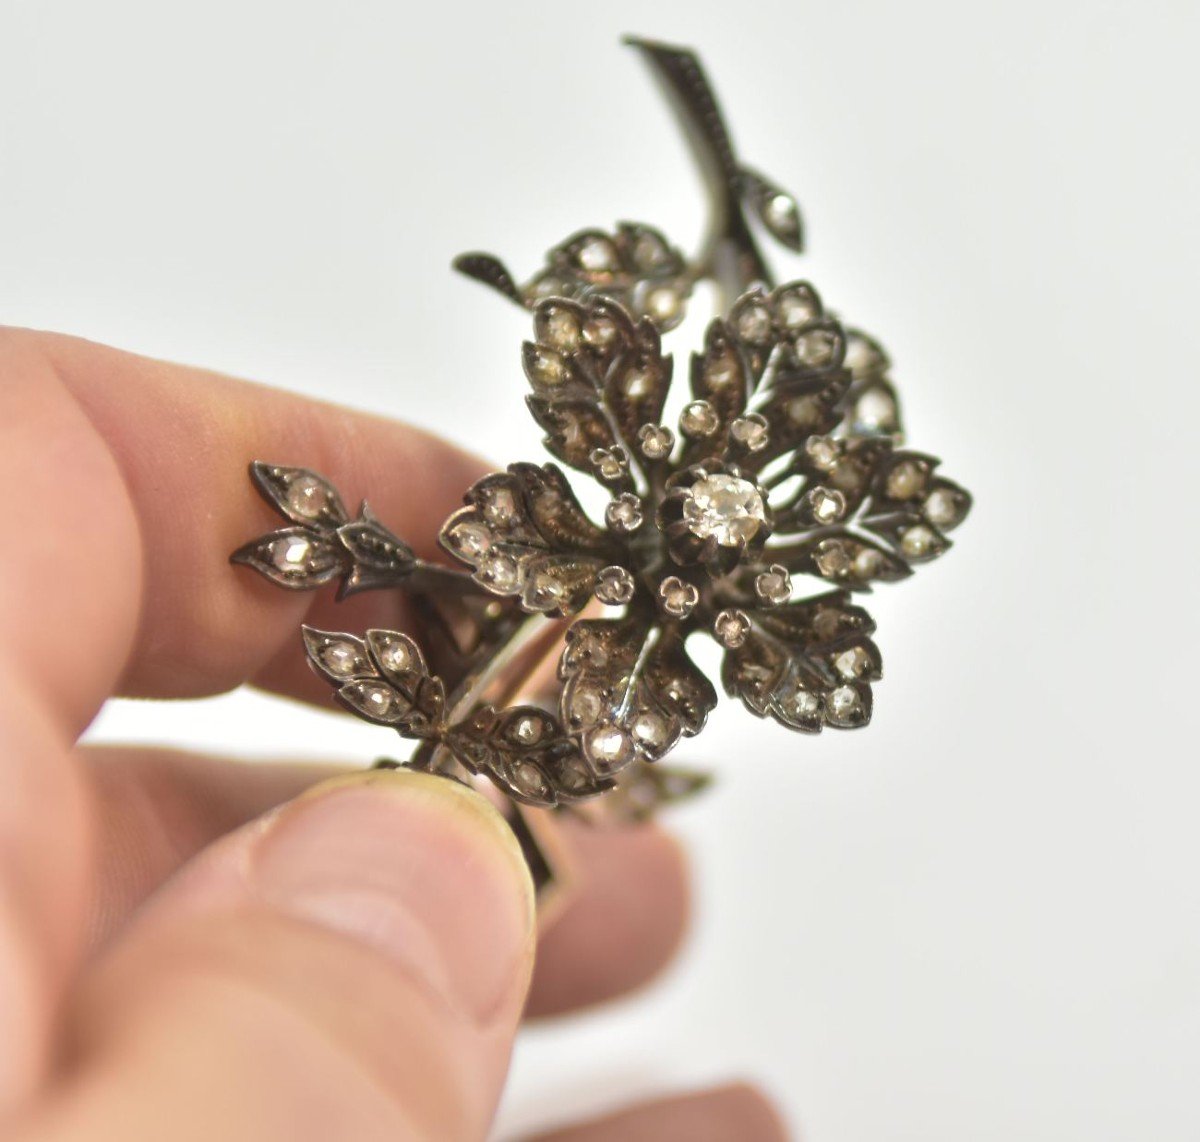 Trembleuse Brooch In Gold And Silver Composed Of 4 Articulated Strands And 1 Floral Pattern-photo-3